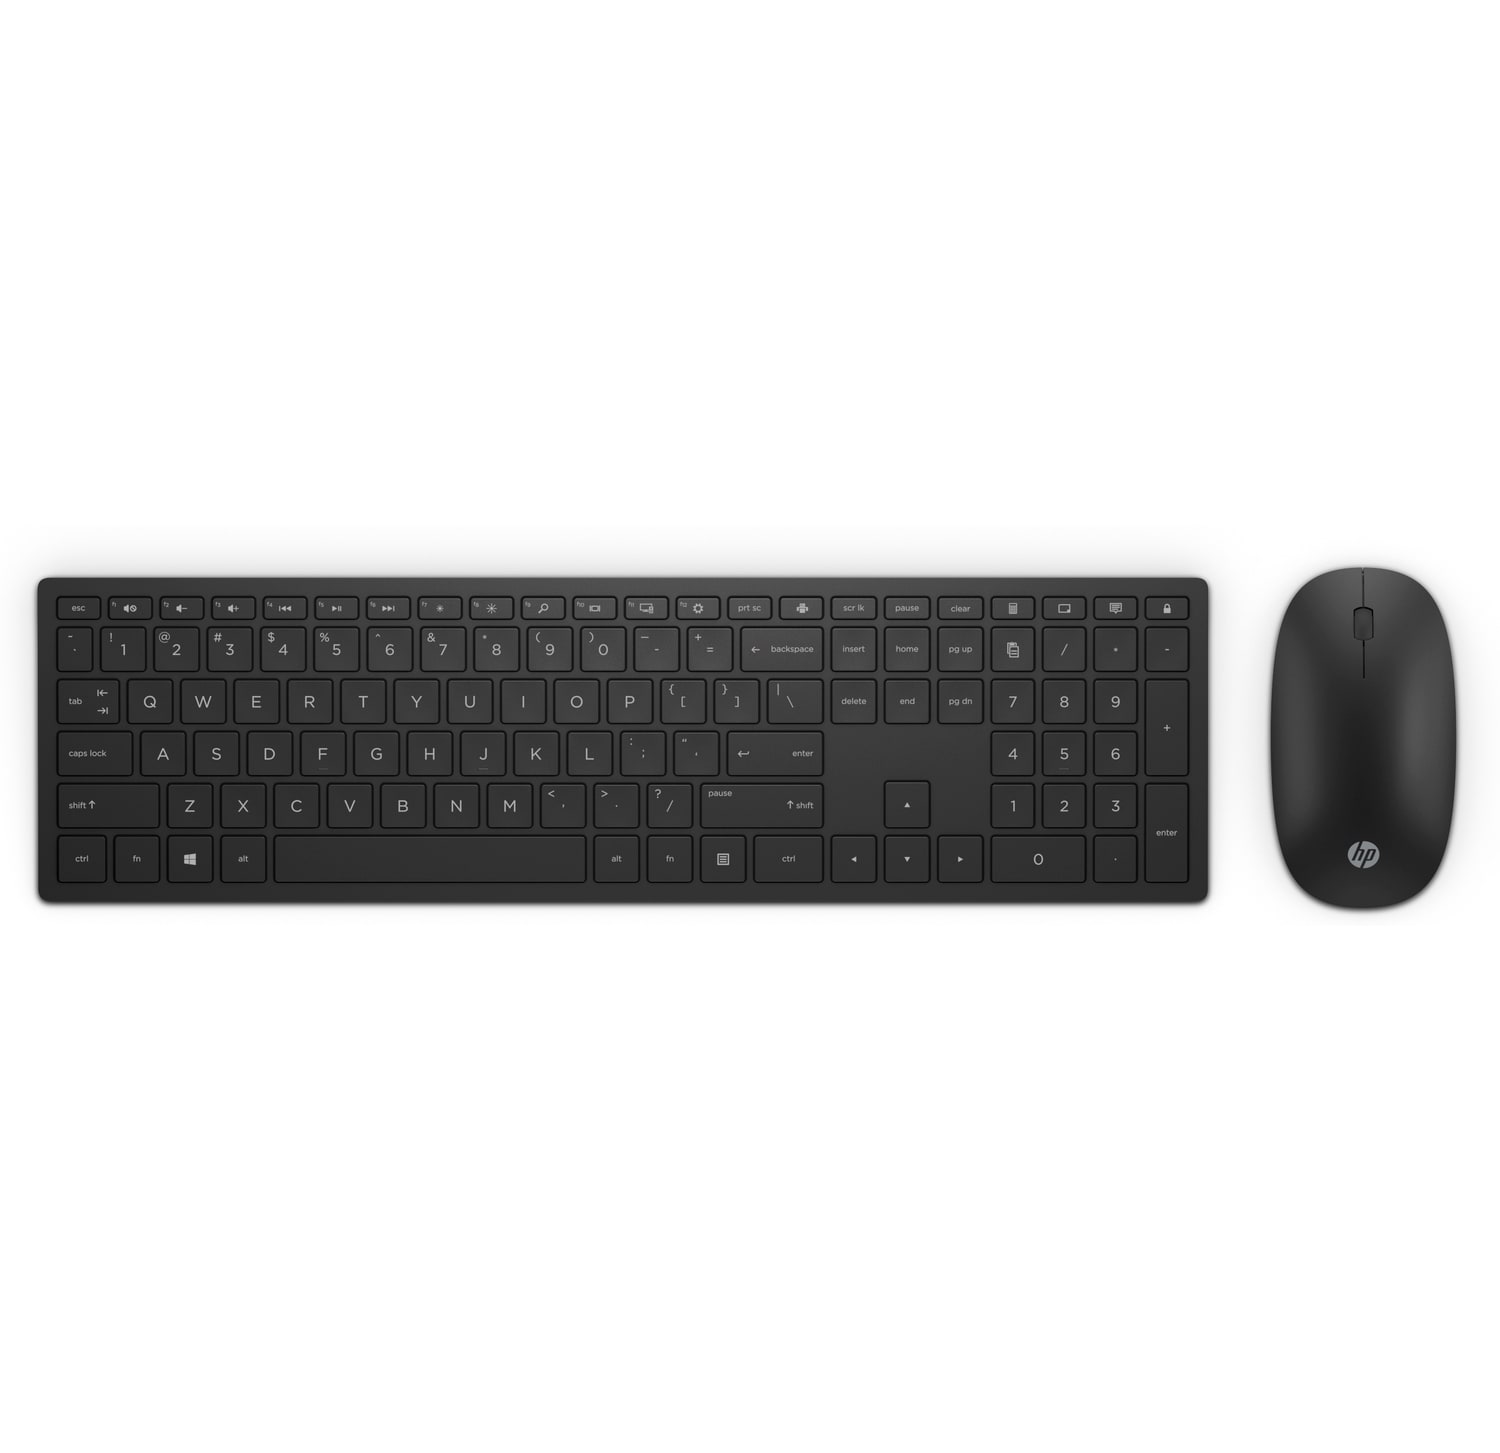 HP Pavilion Wireless Keyboard and Mouse 800, Swiss combo black(4CE99AA#ABL) - image 1 of 7